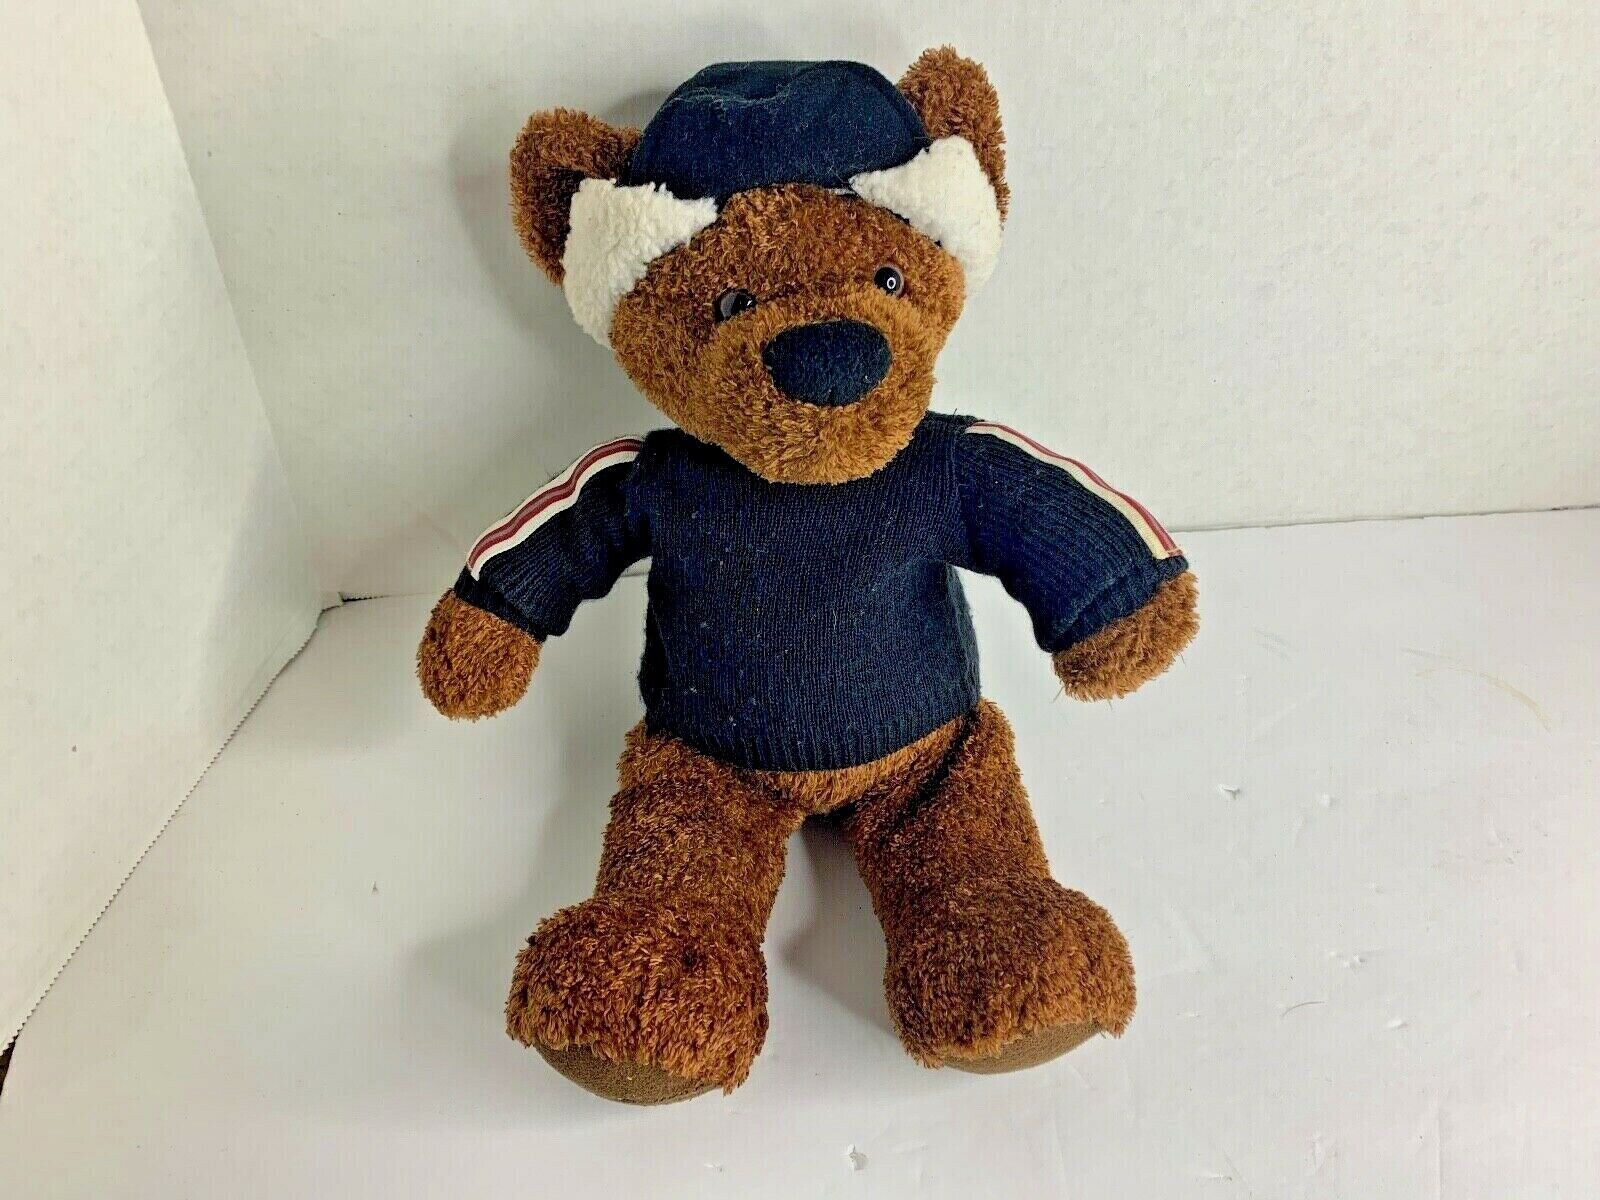 Eddie Bauer Brown Plush Stuffed Bear Animal Toy in Sweater and Hat 13 in tall - $10.88